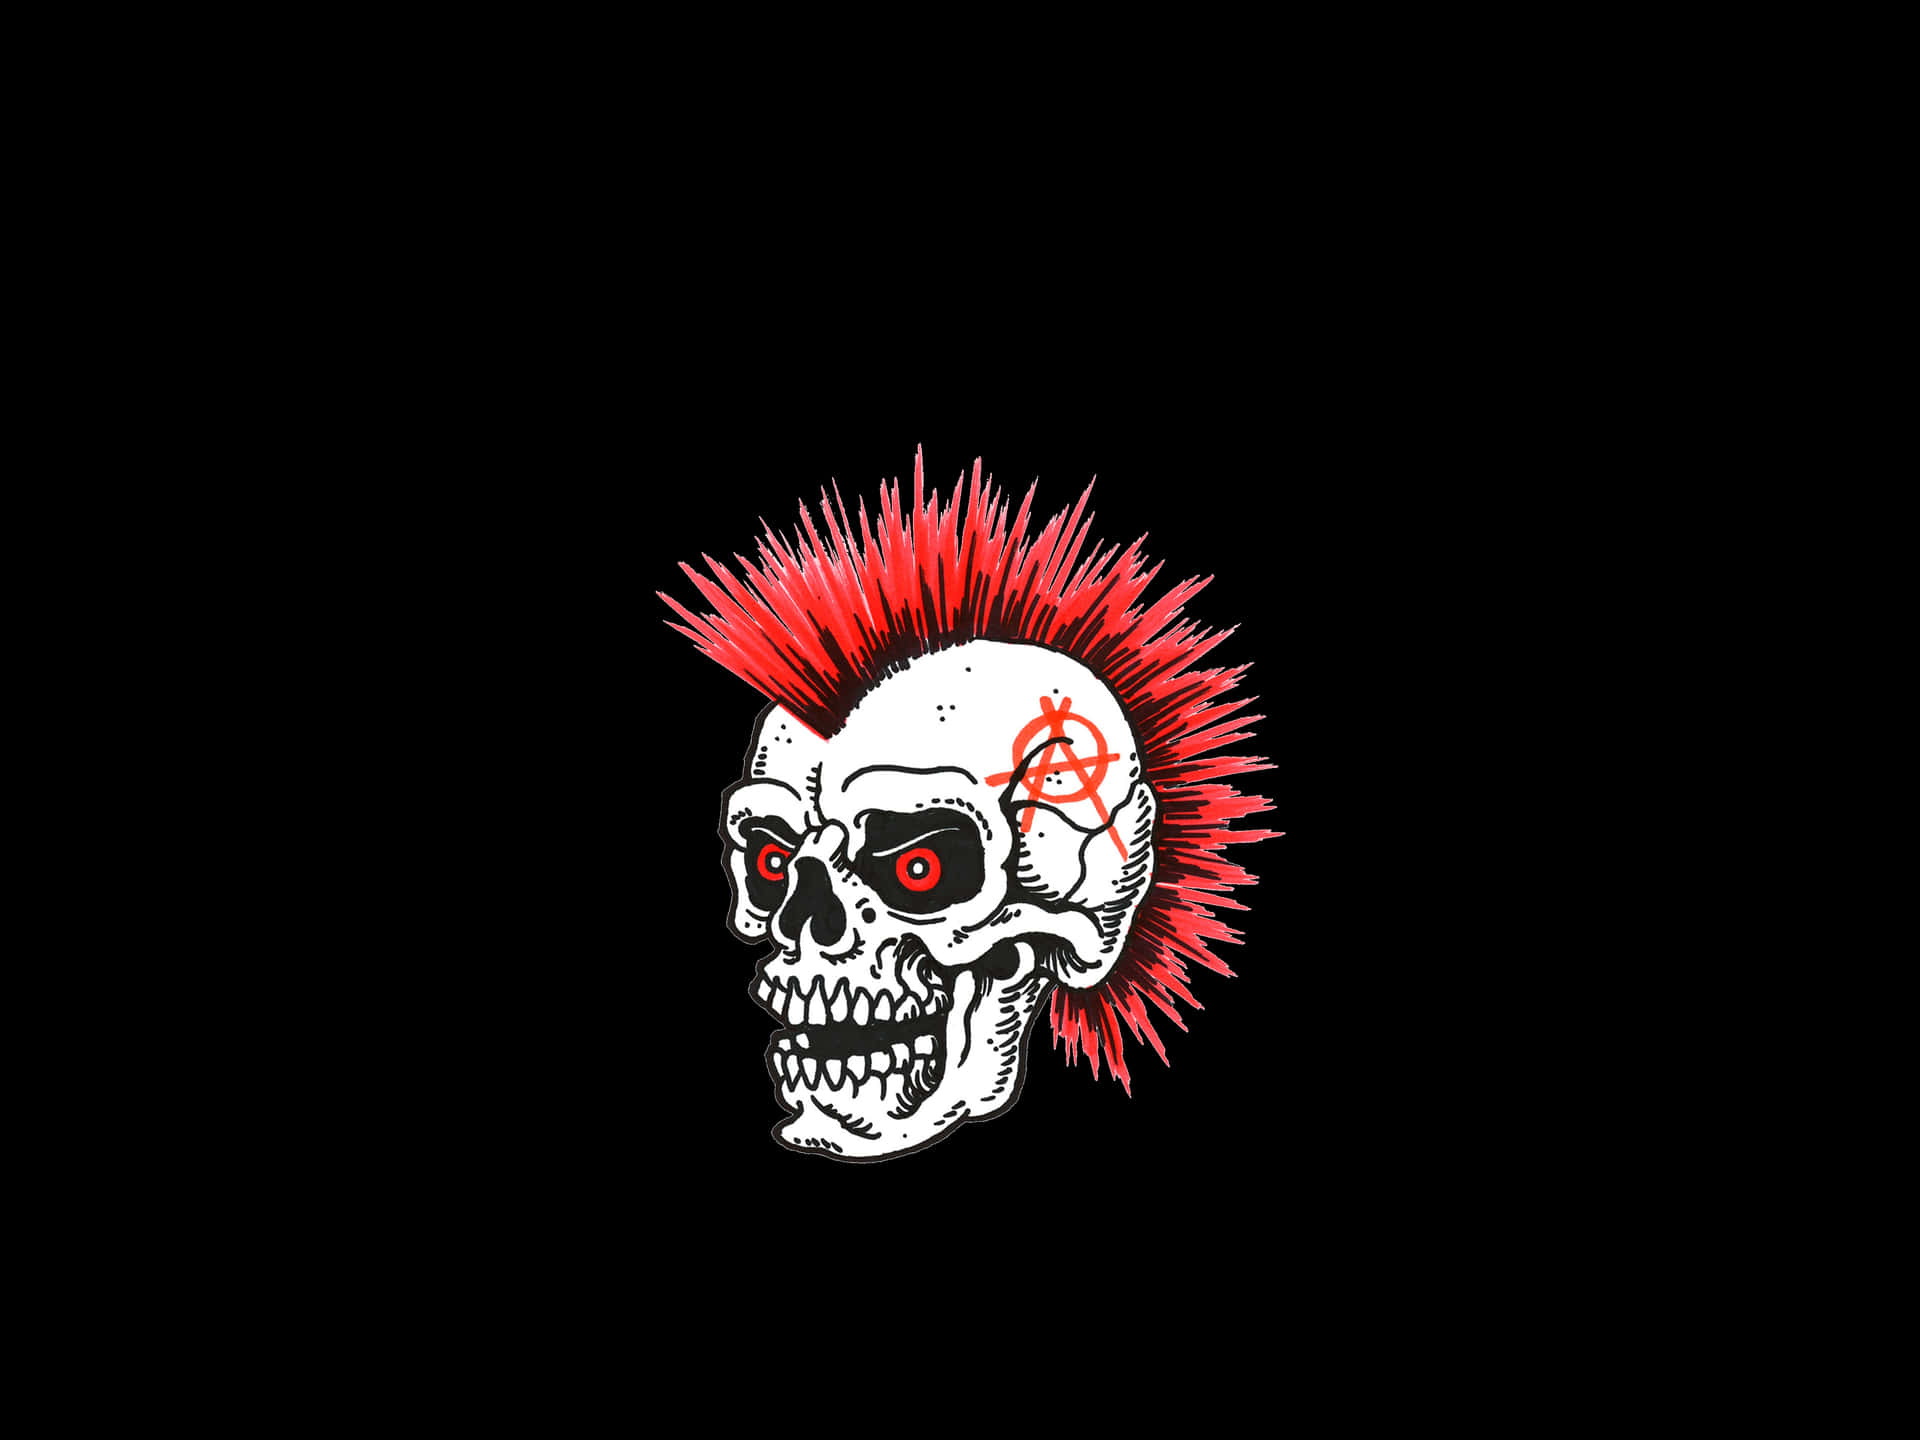 An Awesome Skull With Glowing Red Eyes Wallpaper